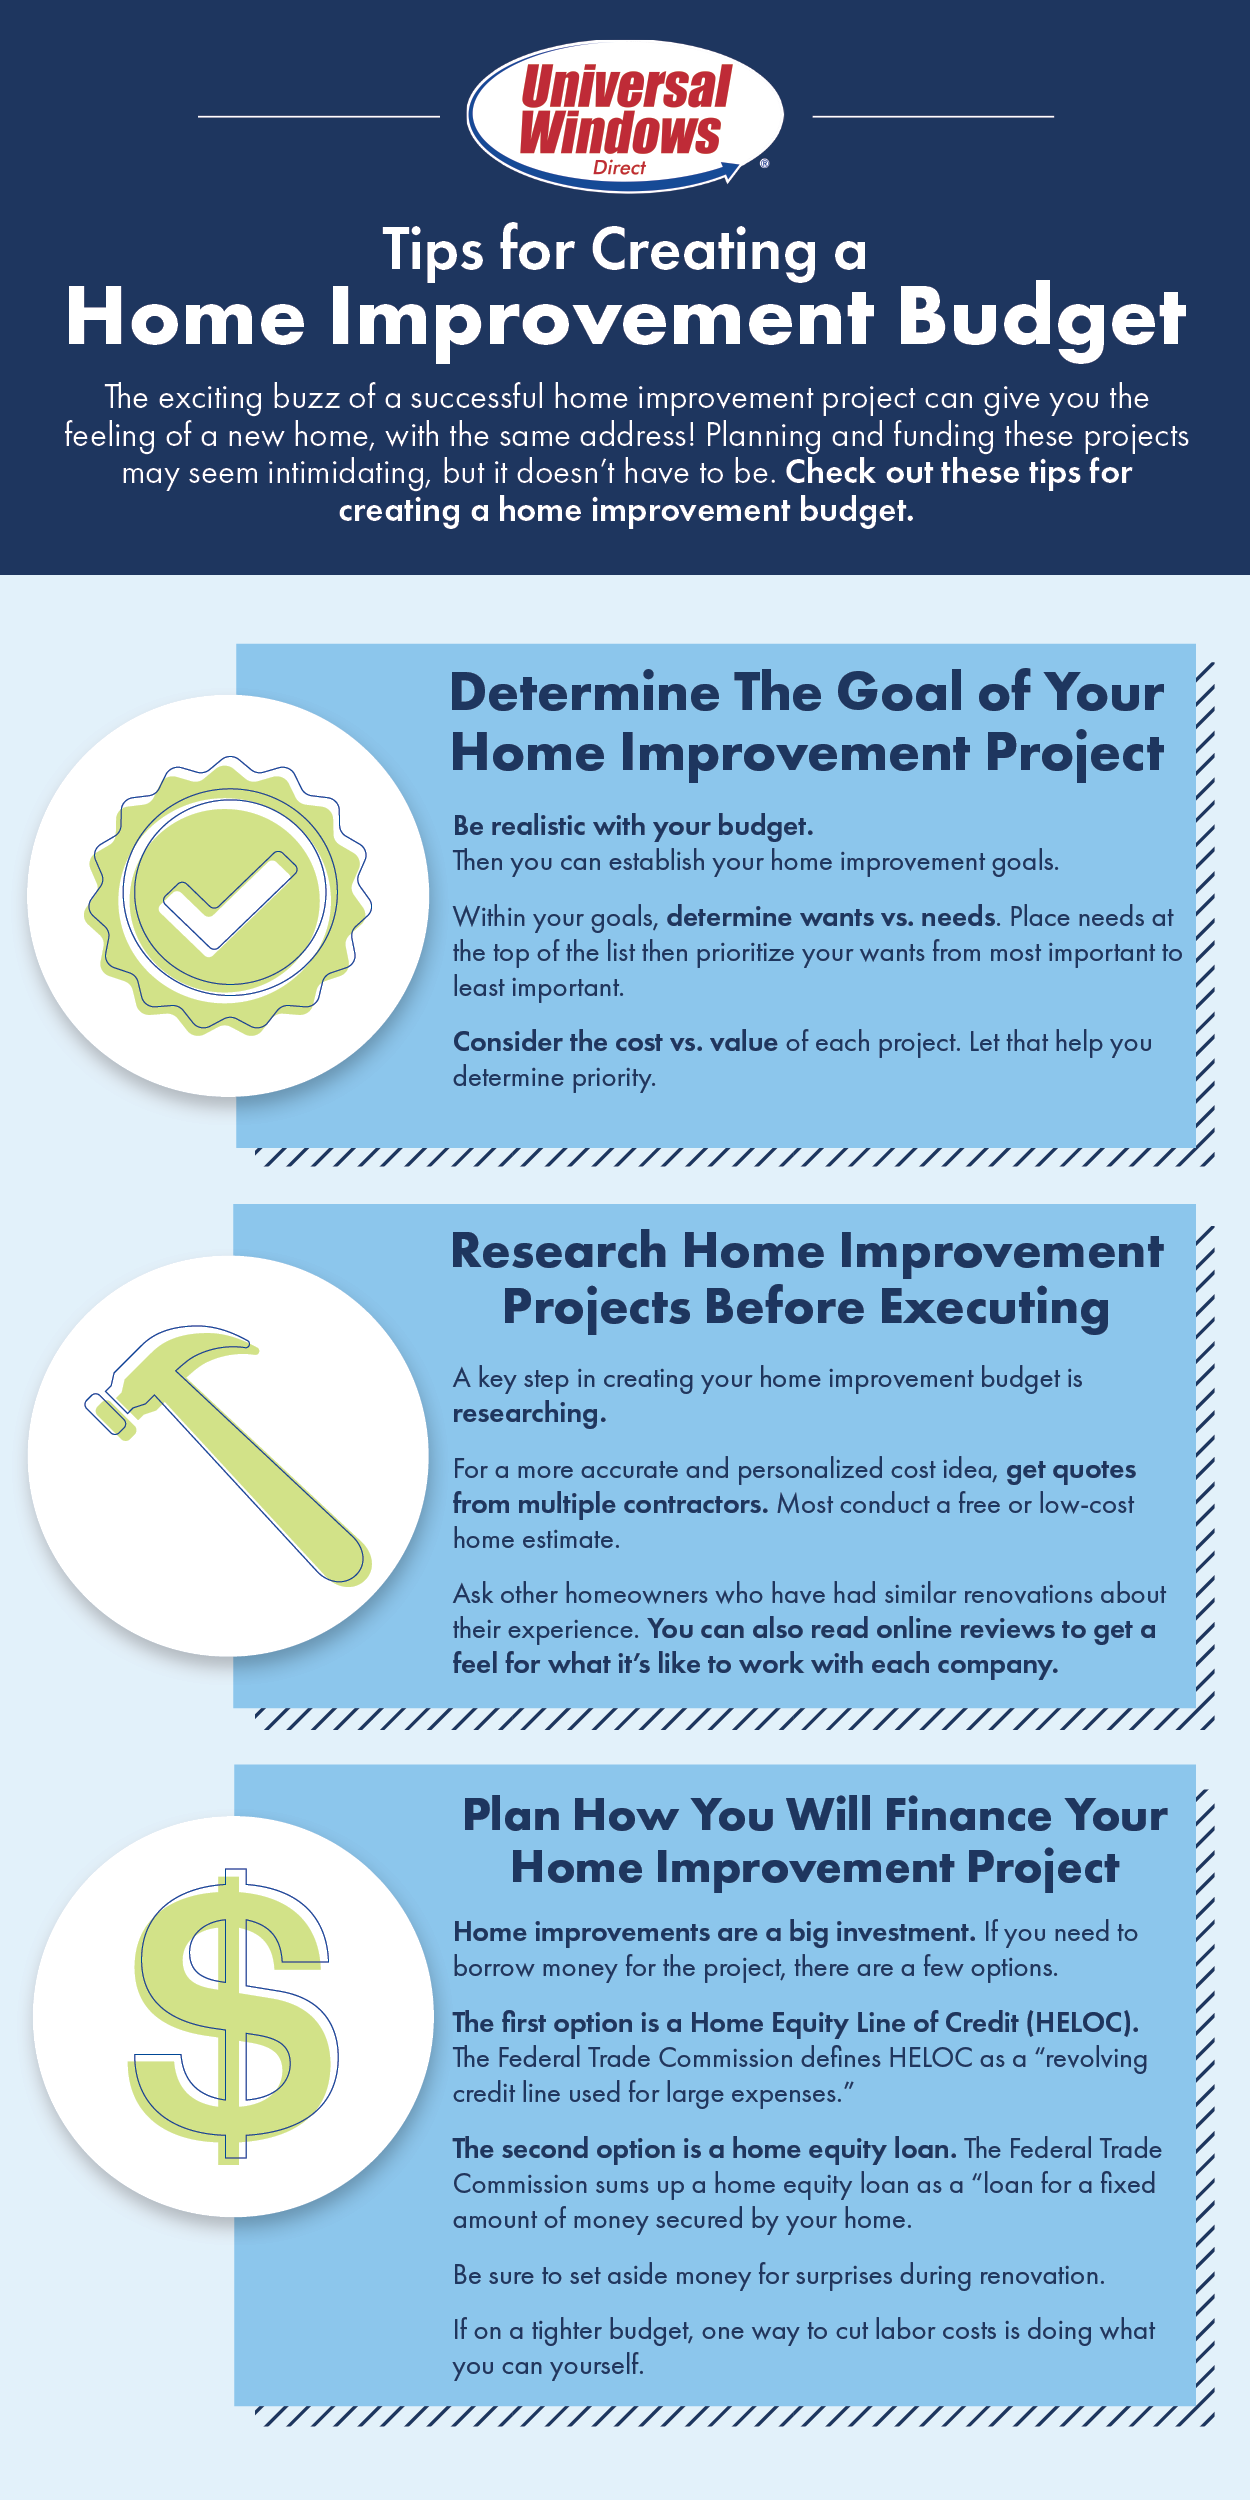 How to create a home improvement budget